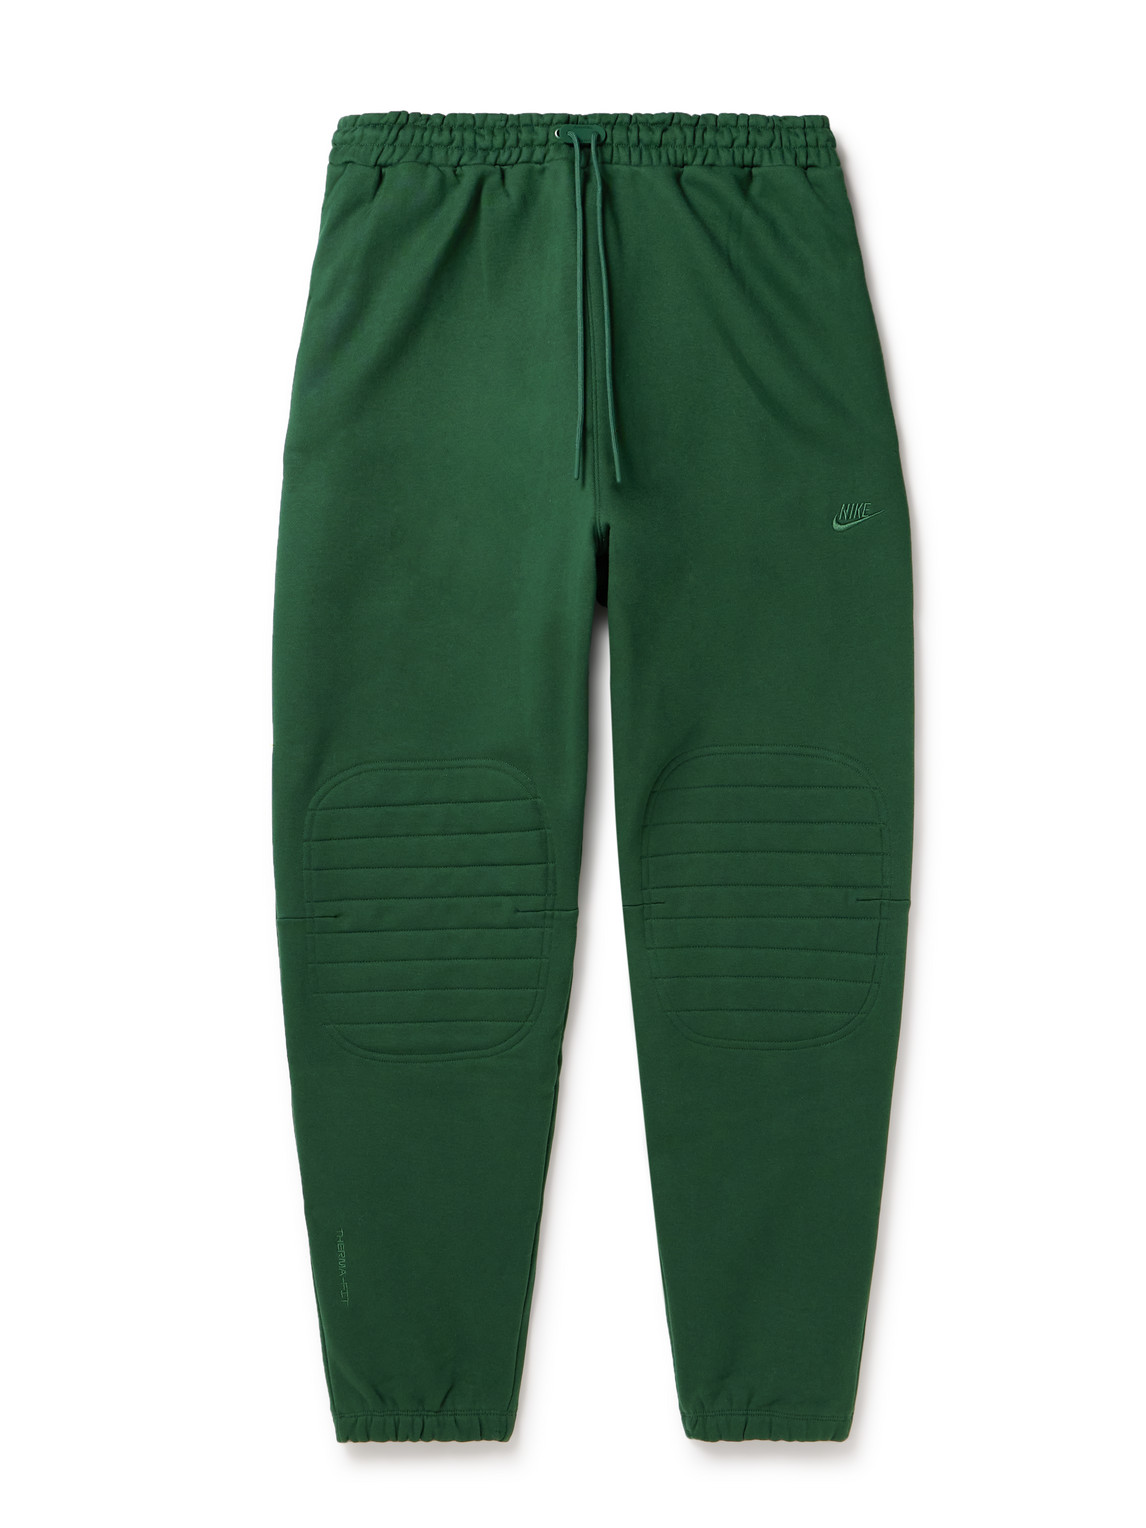 Sportswear Repel Tapered Therma-FIT Sweatpants